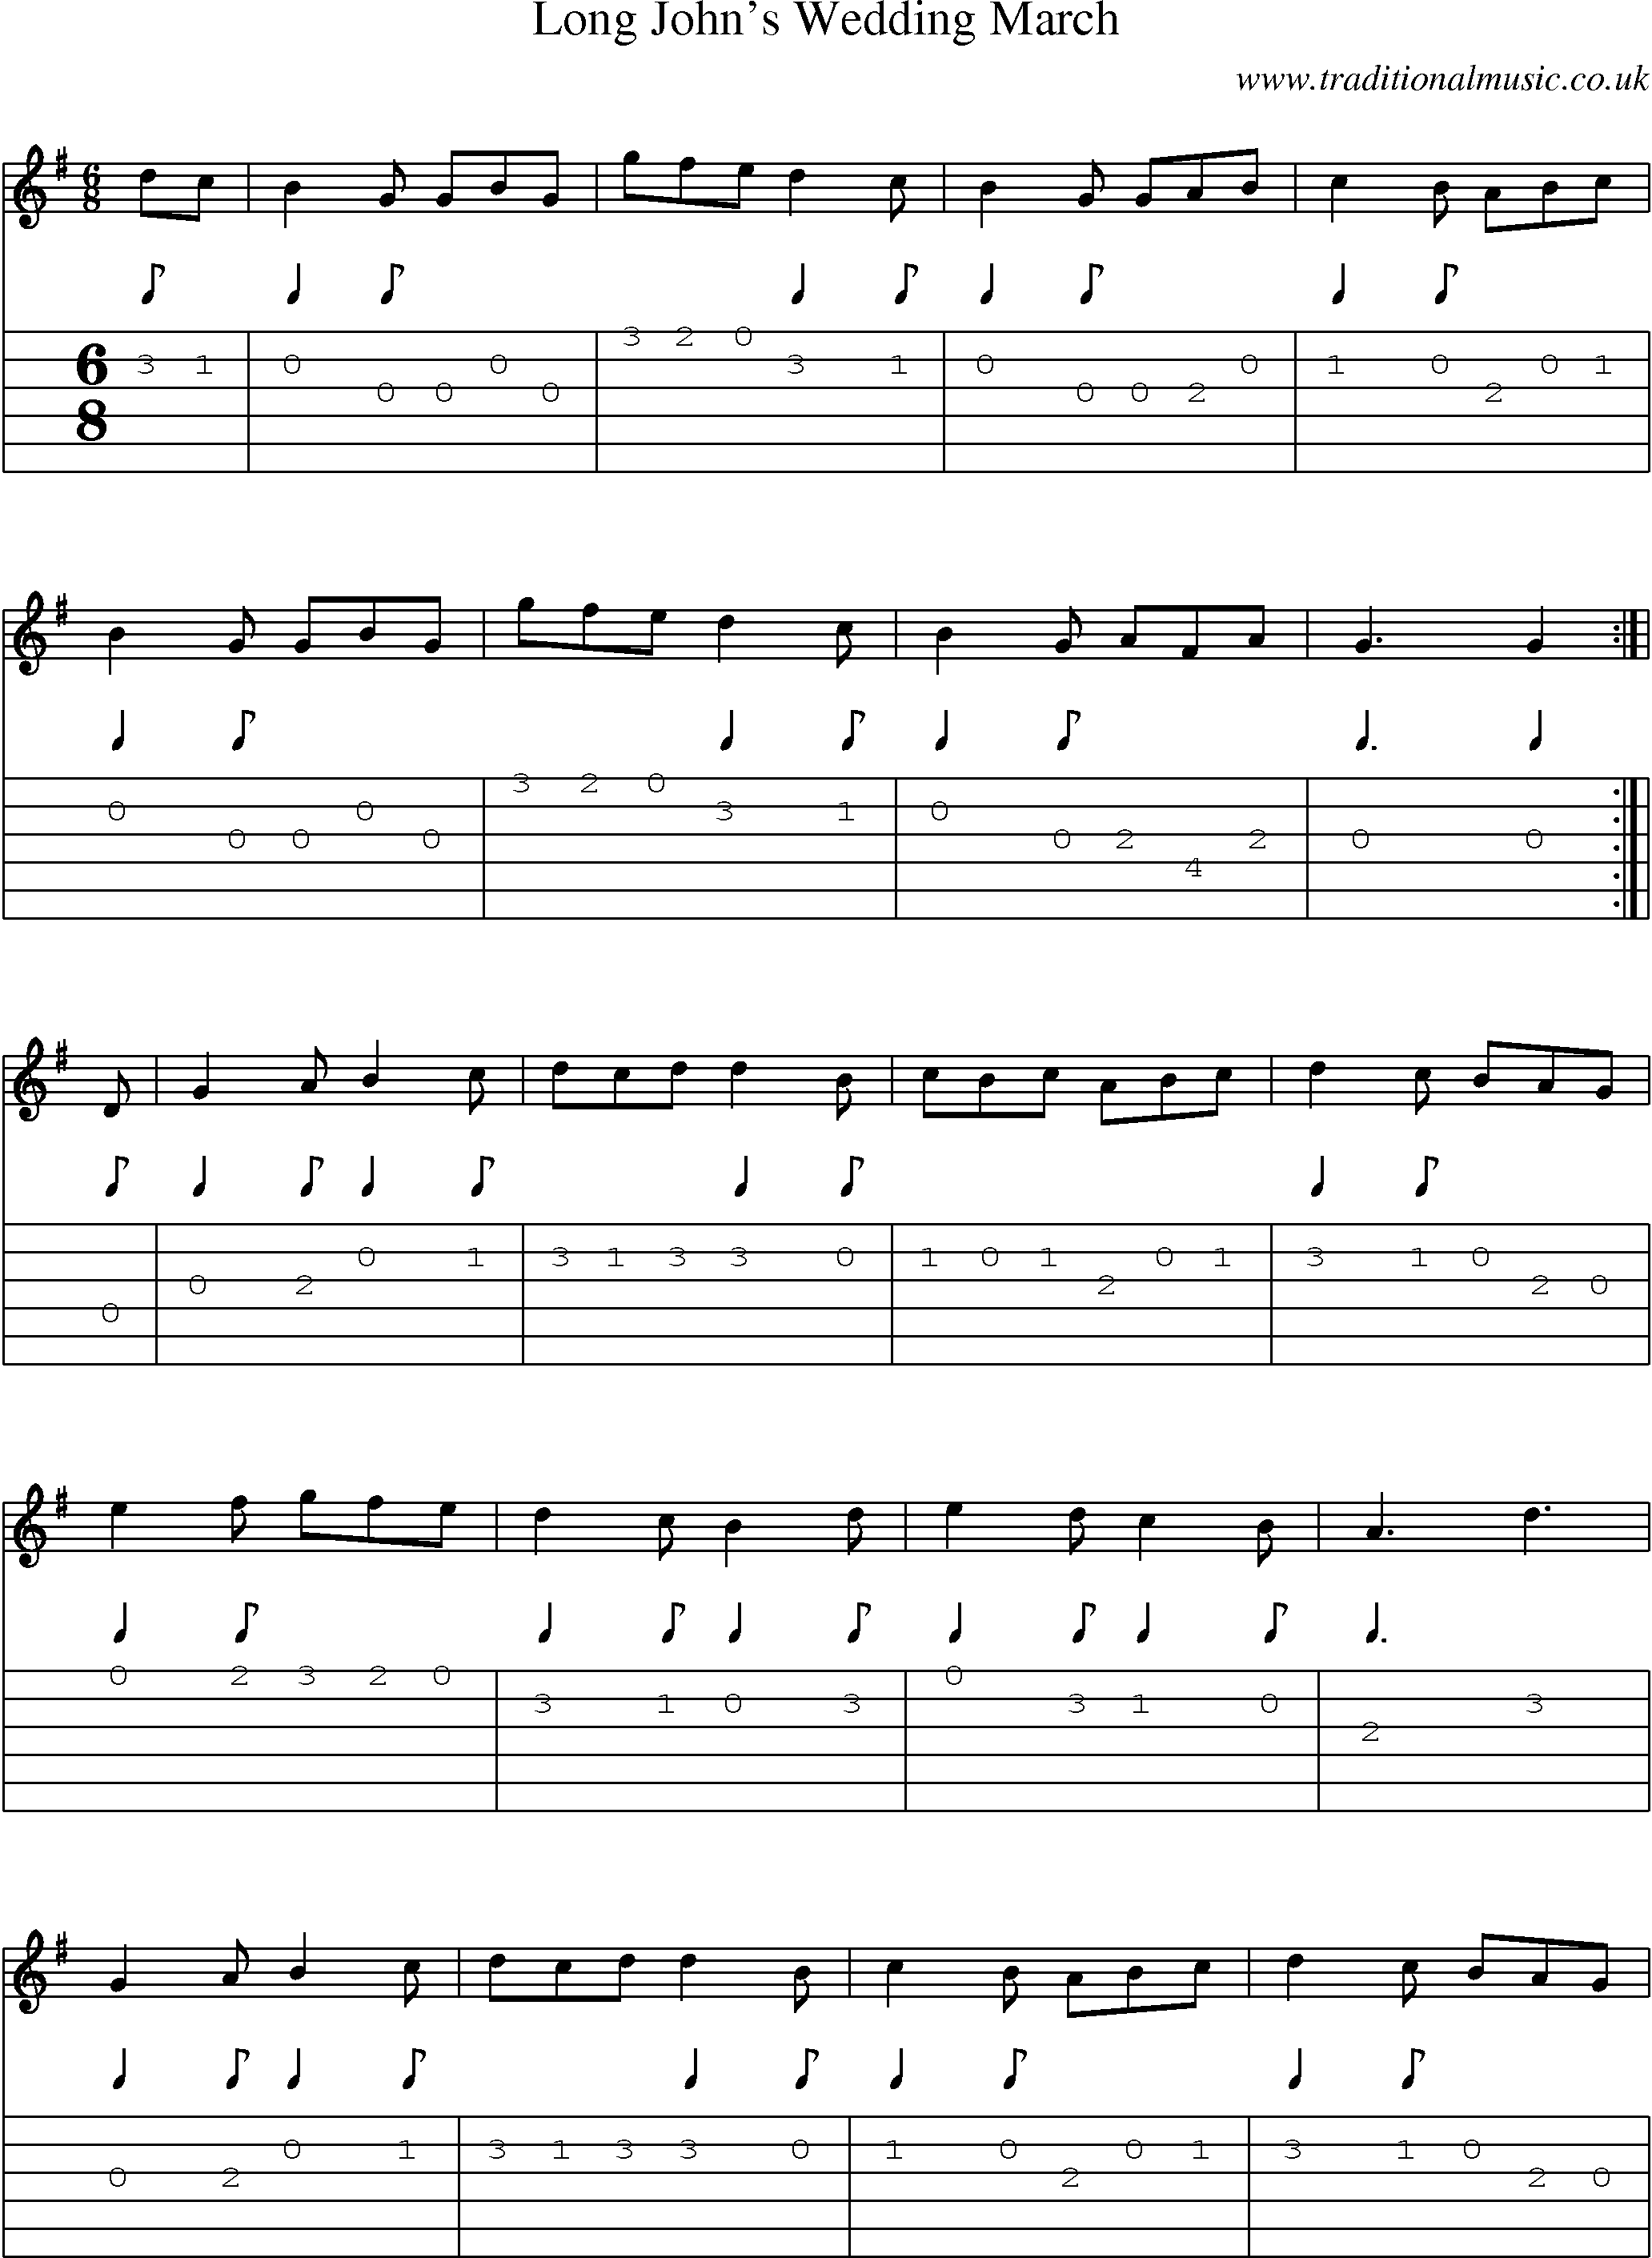 Music Score and Guitar Tabs for Long Johns Wedding March